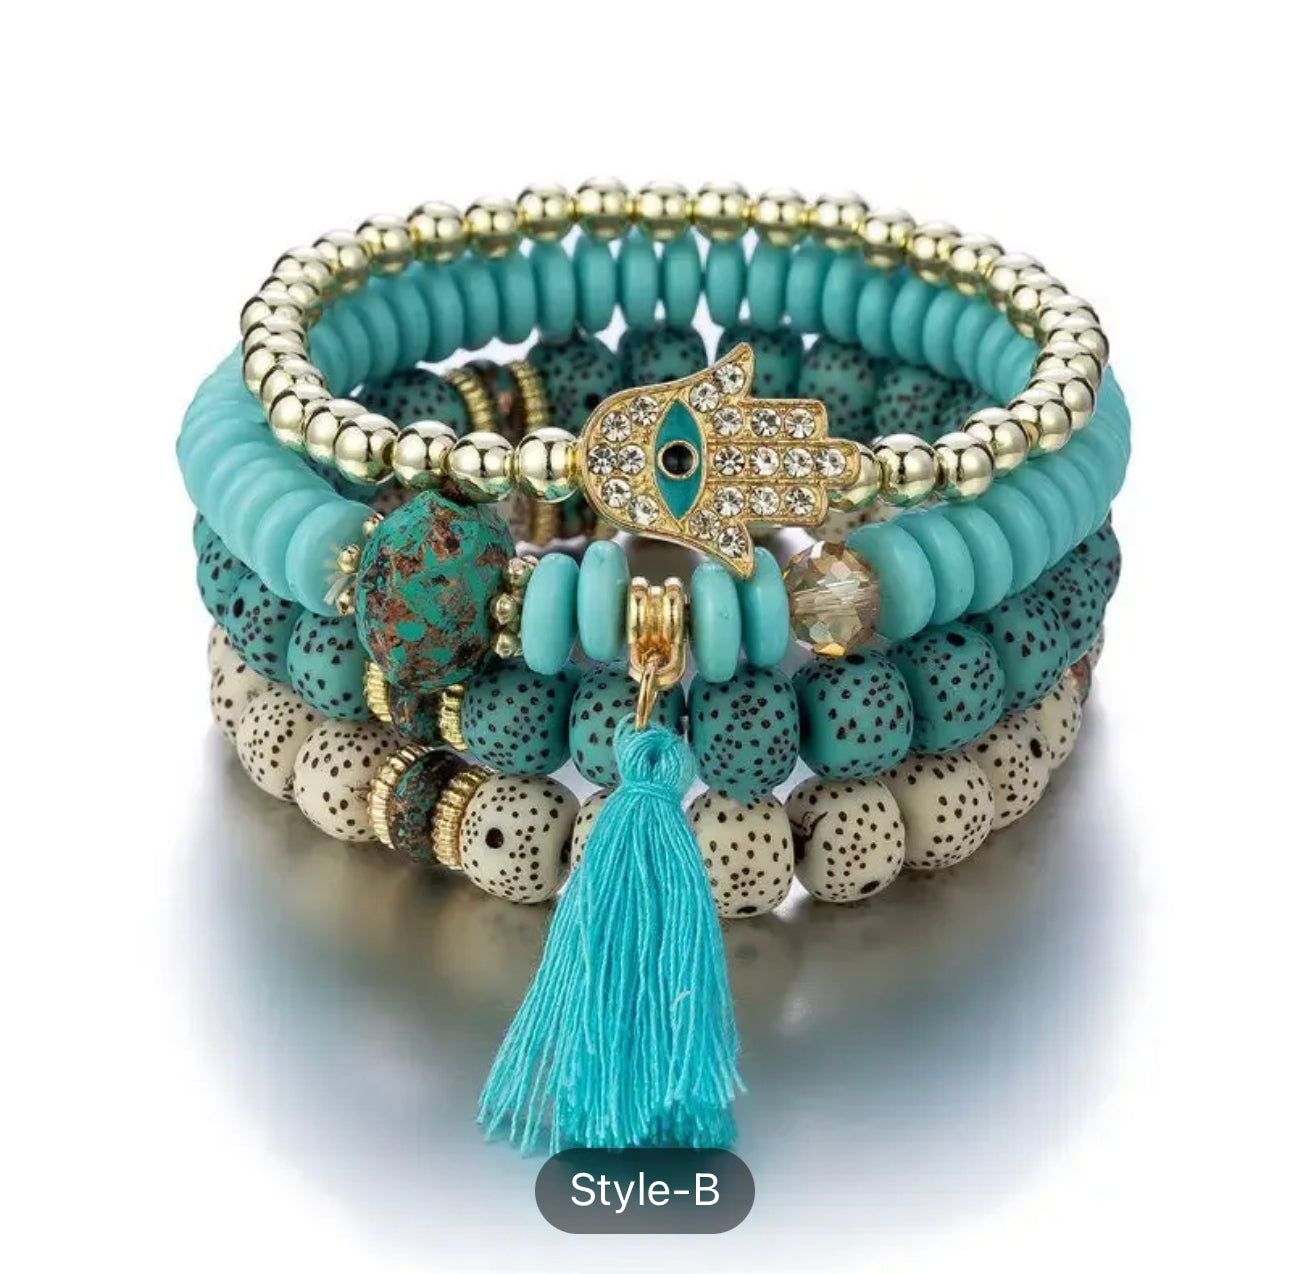 Gorgeous Tassel Palm Eye Pendant Bracelet - A Perfect Addition to Your Boho Look!